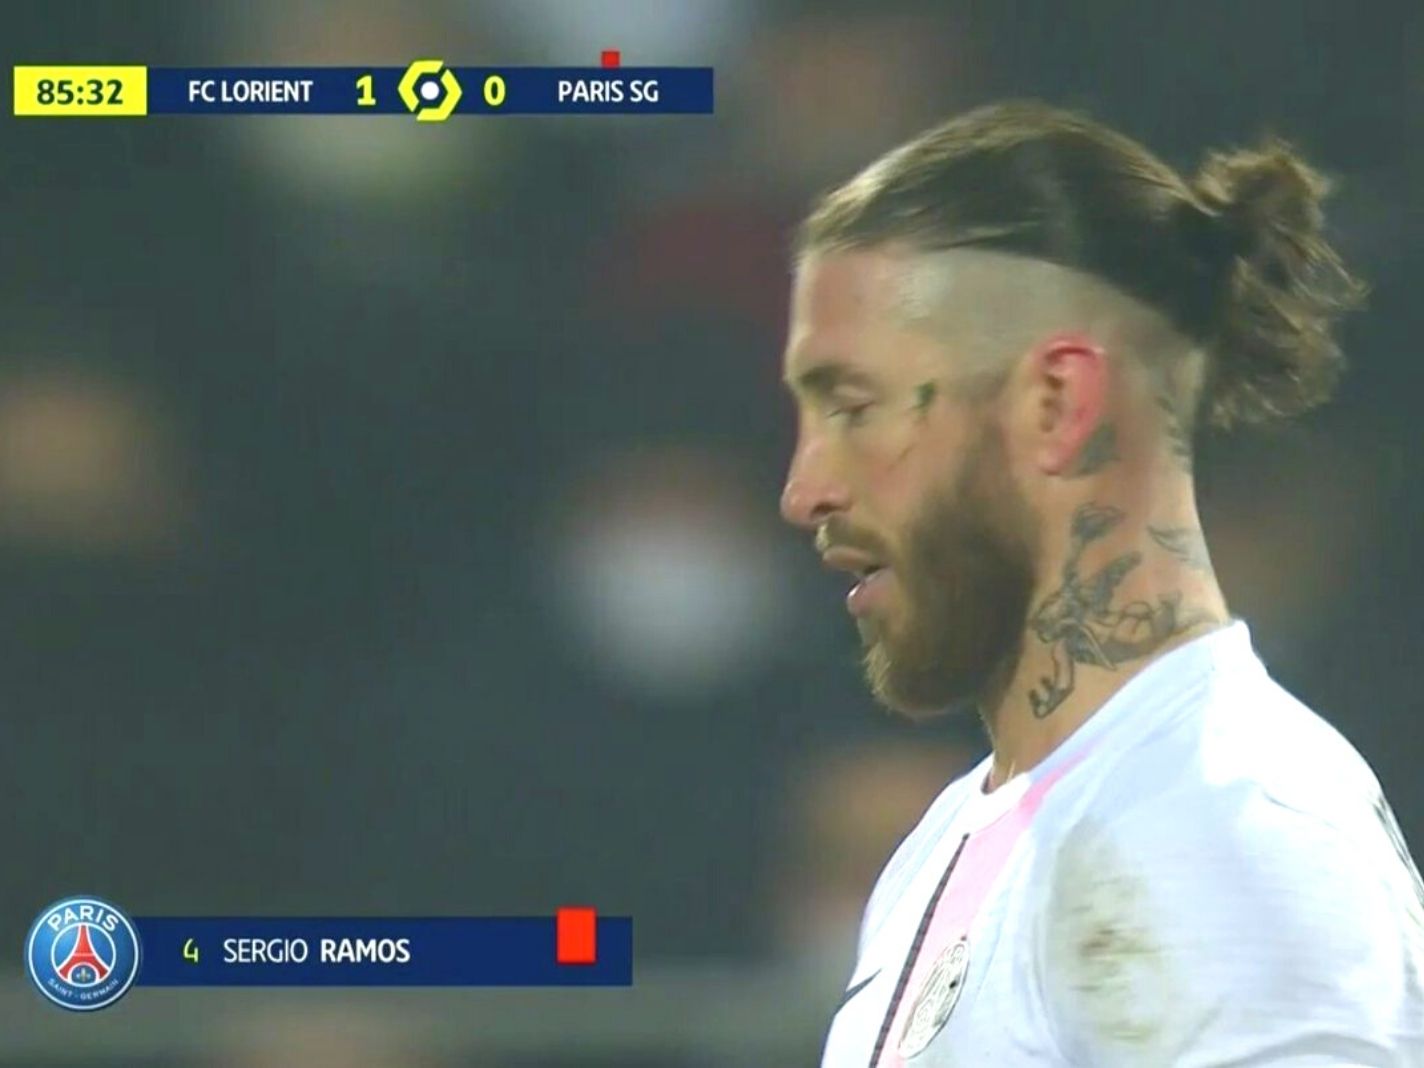 Fans claim ‘he’s back’ as Sergio Ramos gets first red card for PSG